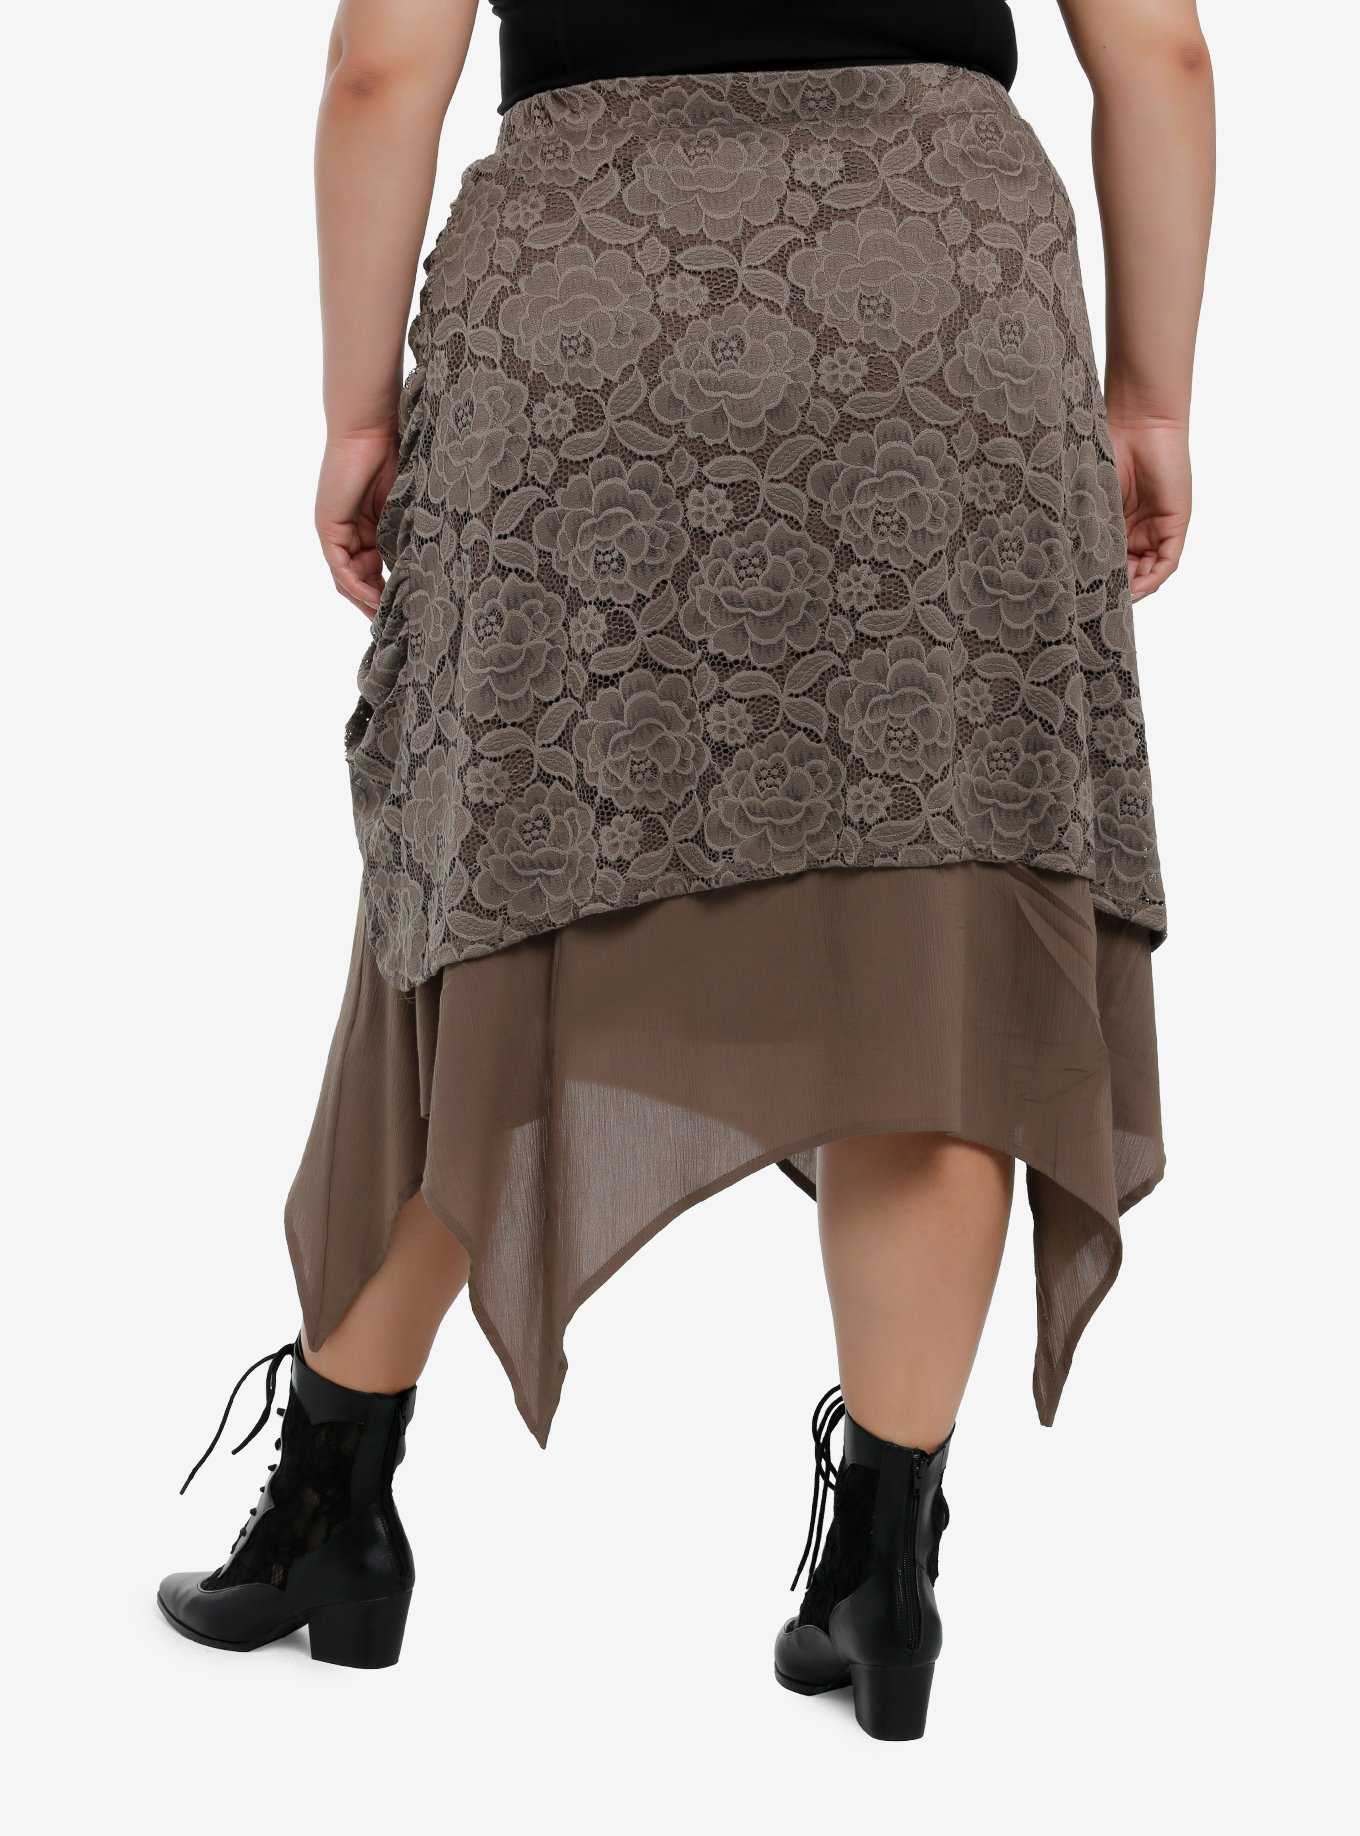 Thorn & Fable Brown Lace Ruched Hanky Hem Midi Skirt Plus Size, , hi-res